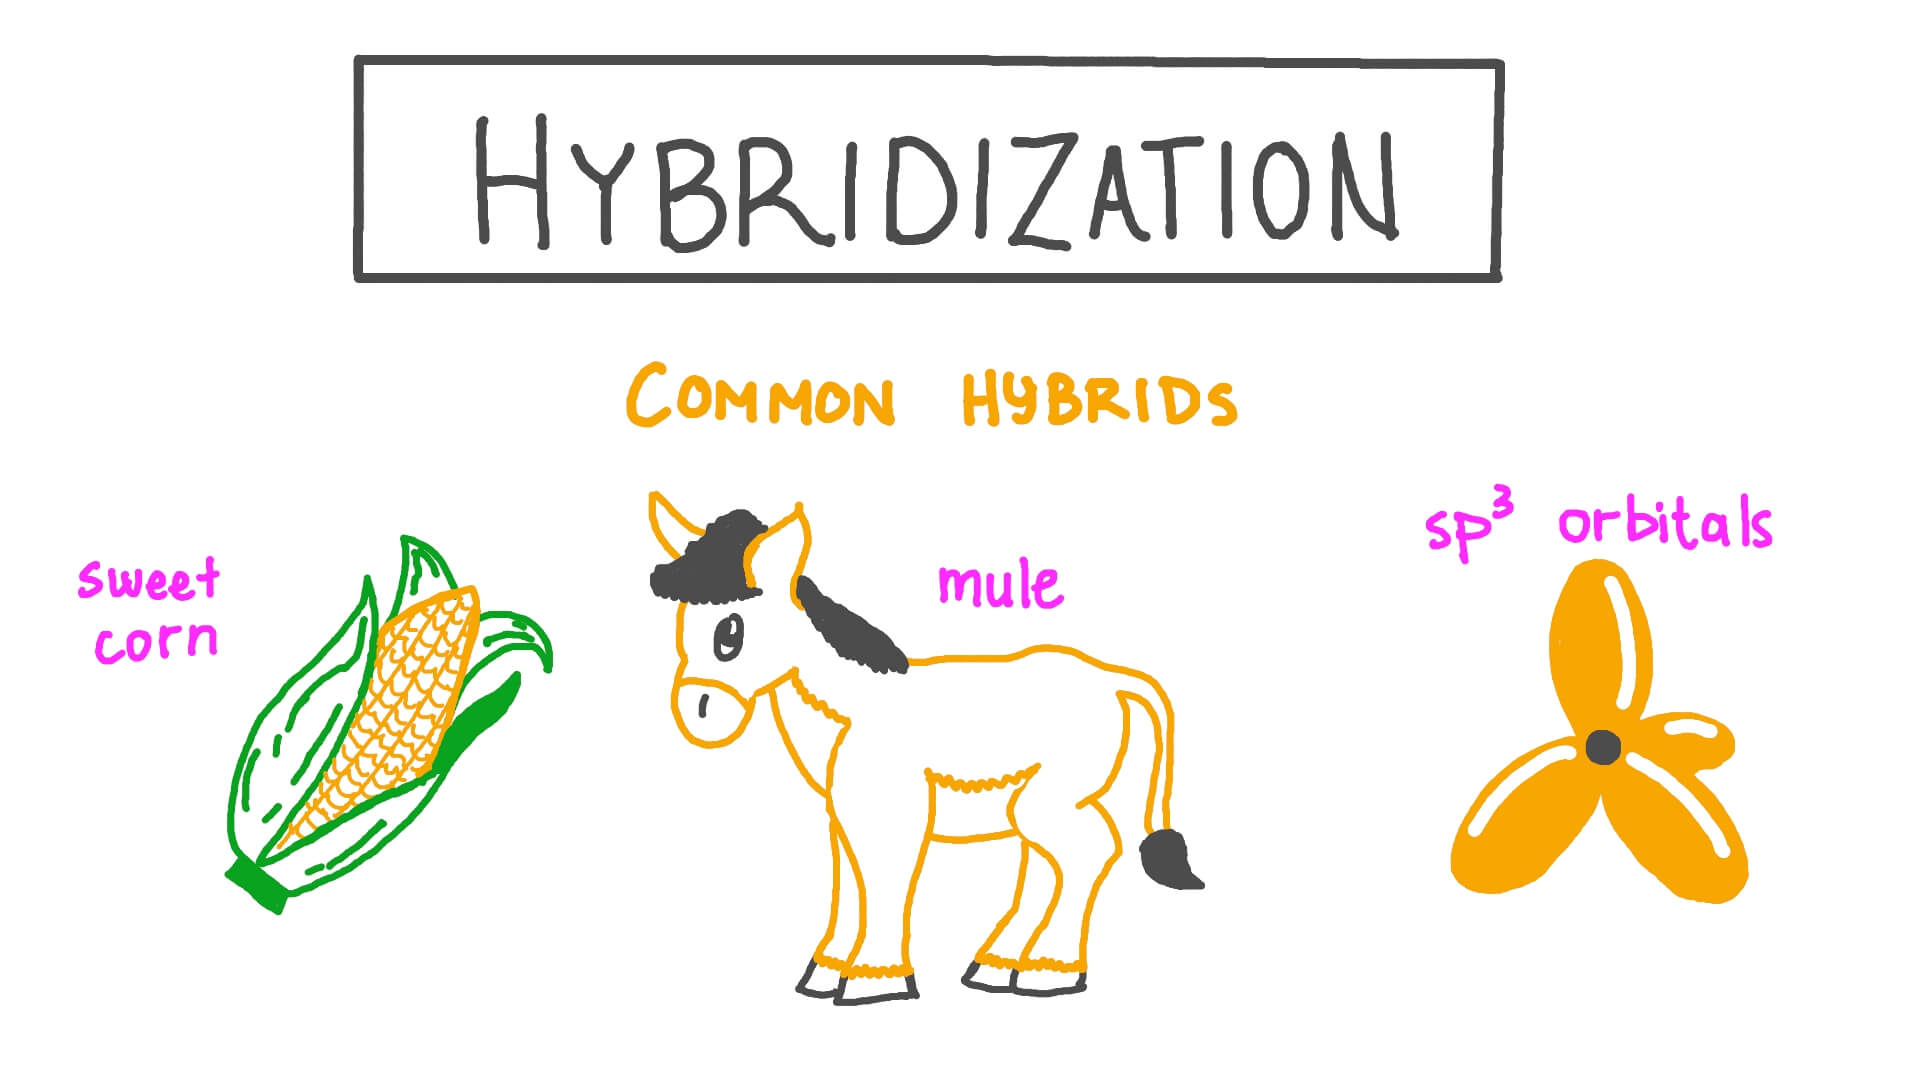 17-extraordinary-facts-about-hybridization